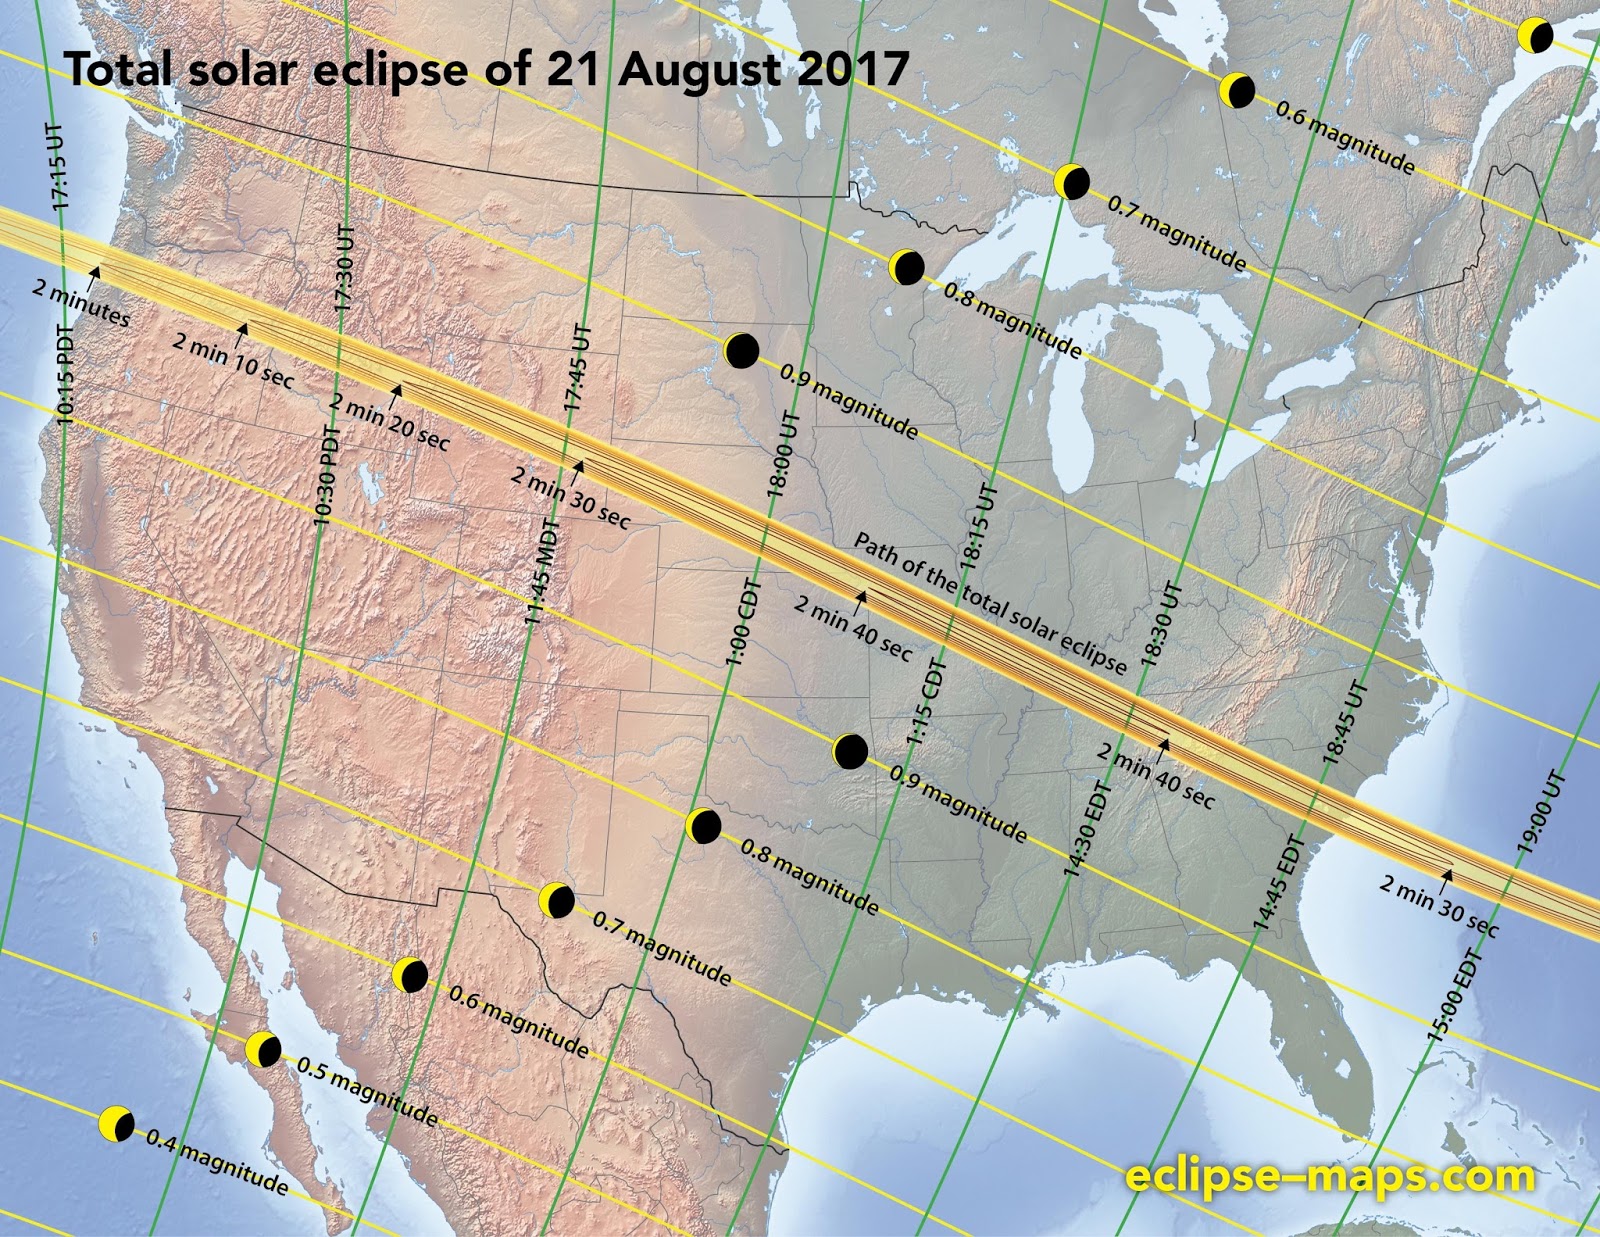 Total_solar_eclipse_21August2017-map.jpg